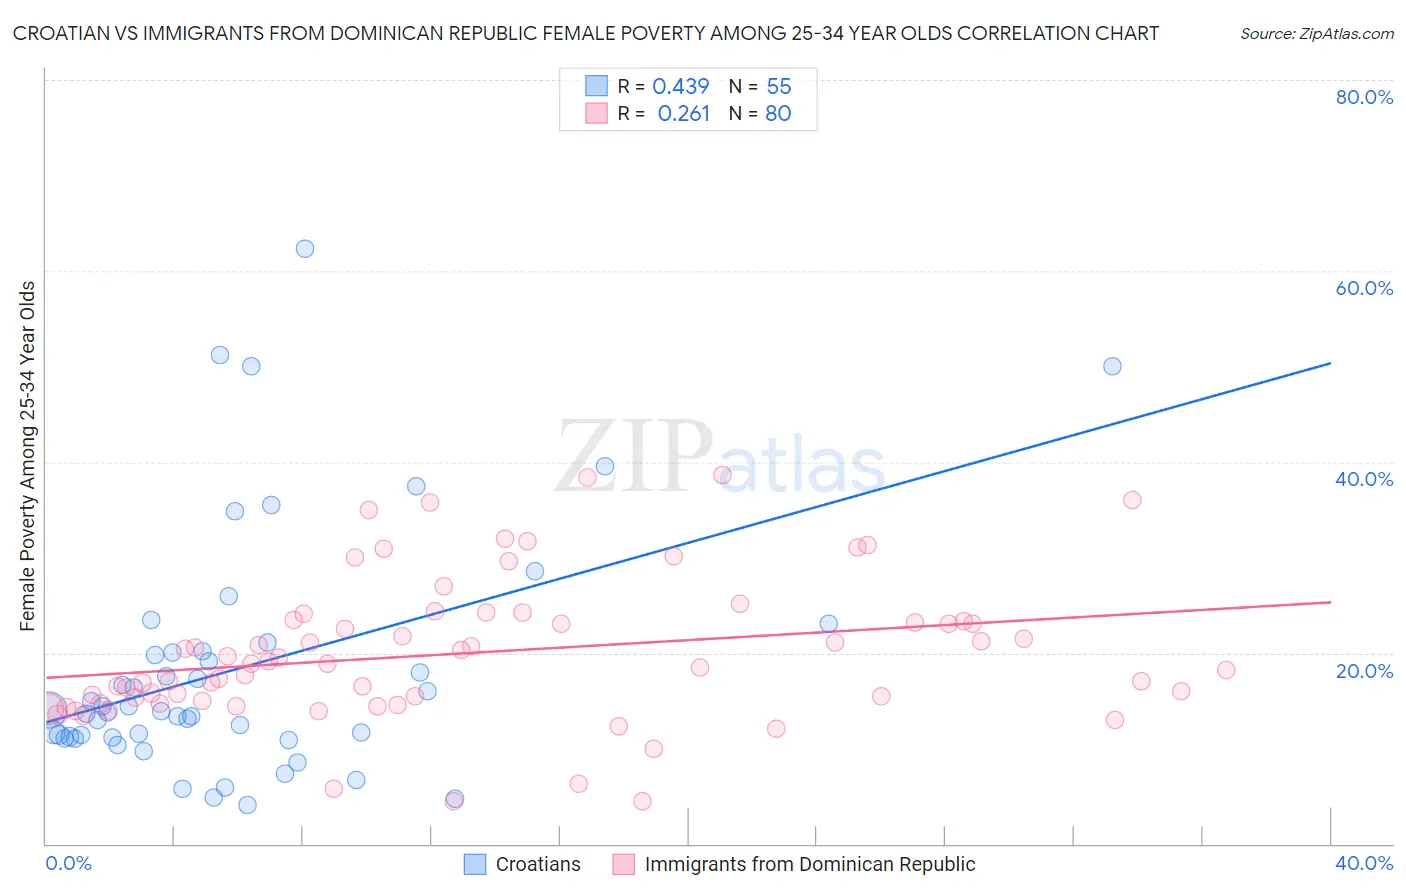 Croatian vs Immigrants from Dominican Republic Female Poverty Among 25-34 Year Olds